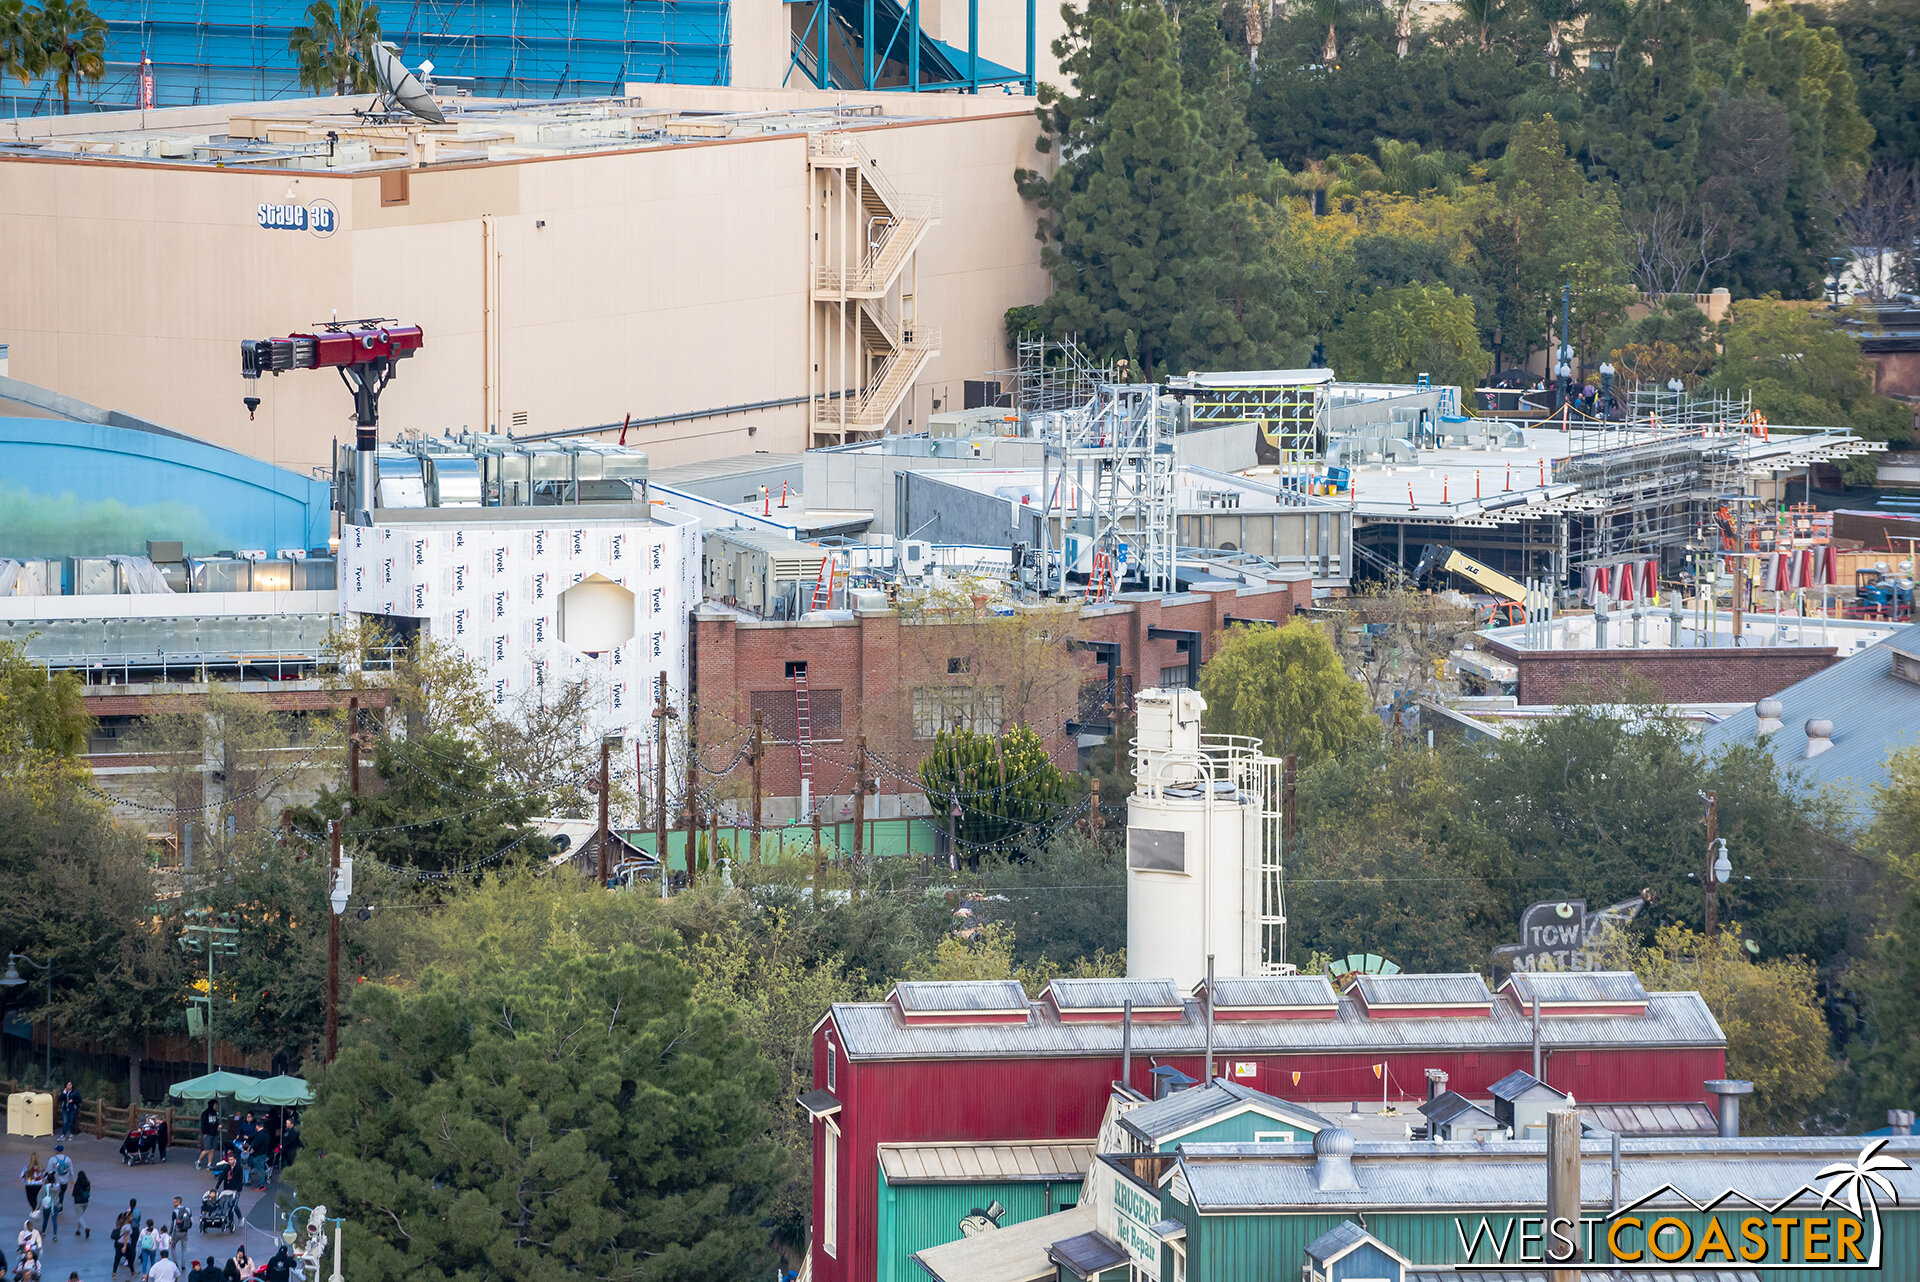  It won’t be as spectacular as Galaxy’s Edge, but it should still be nice. 